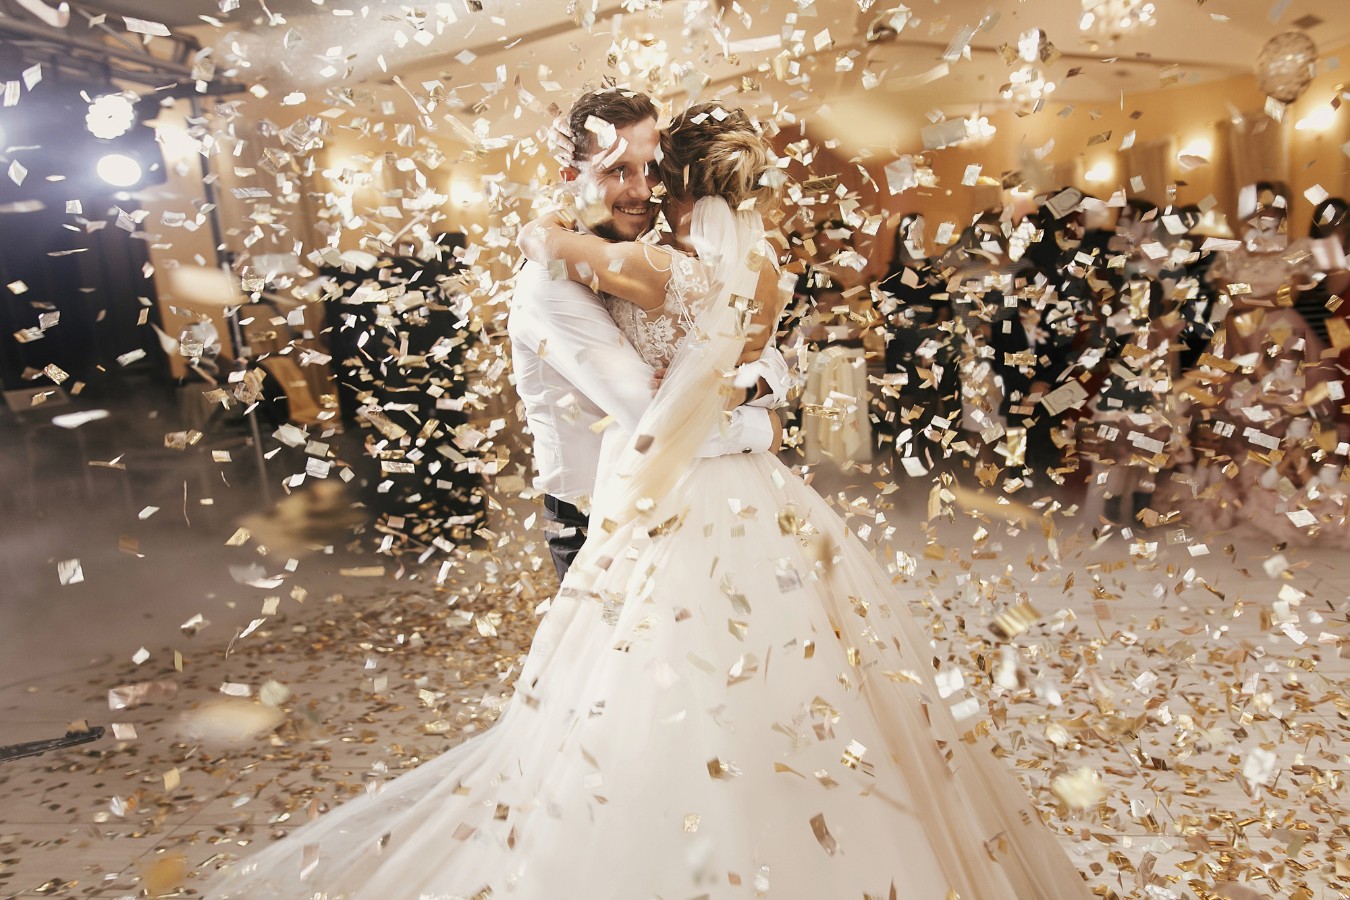 Wedding Reception Order of Events: A Step-by-Step Timeline for a Flawless Celebration